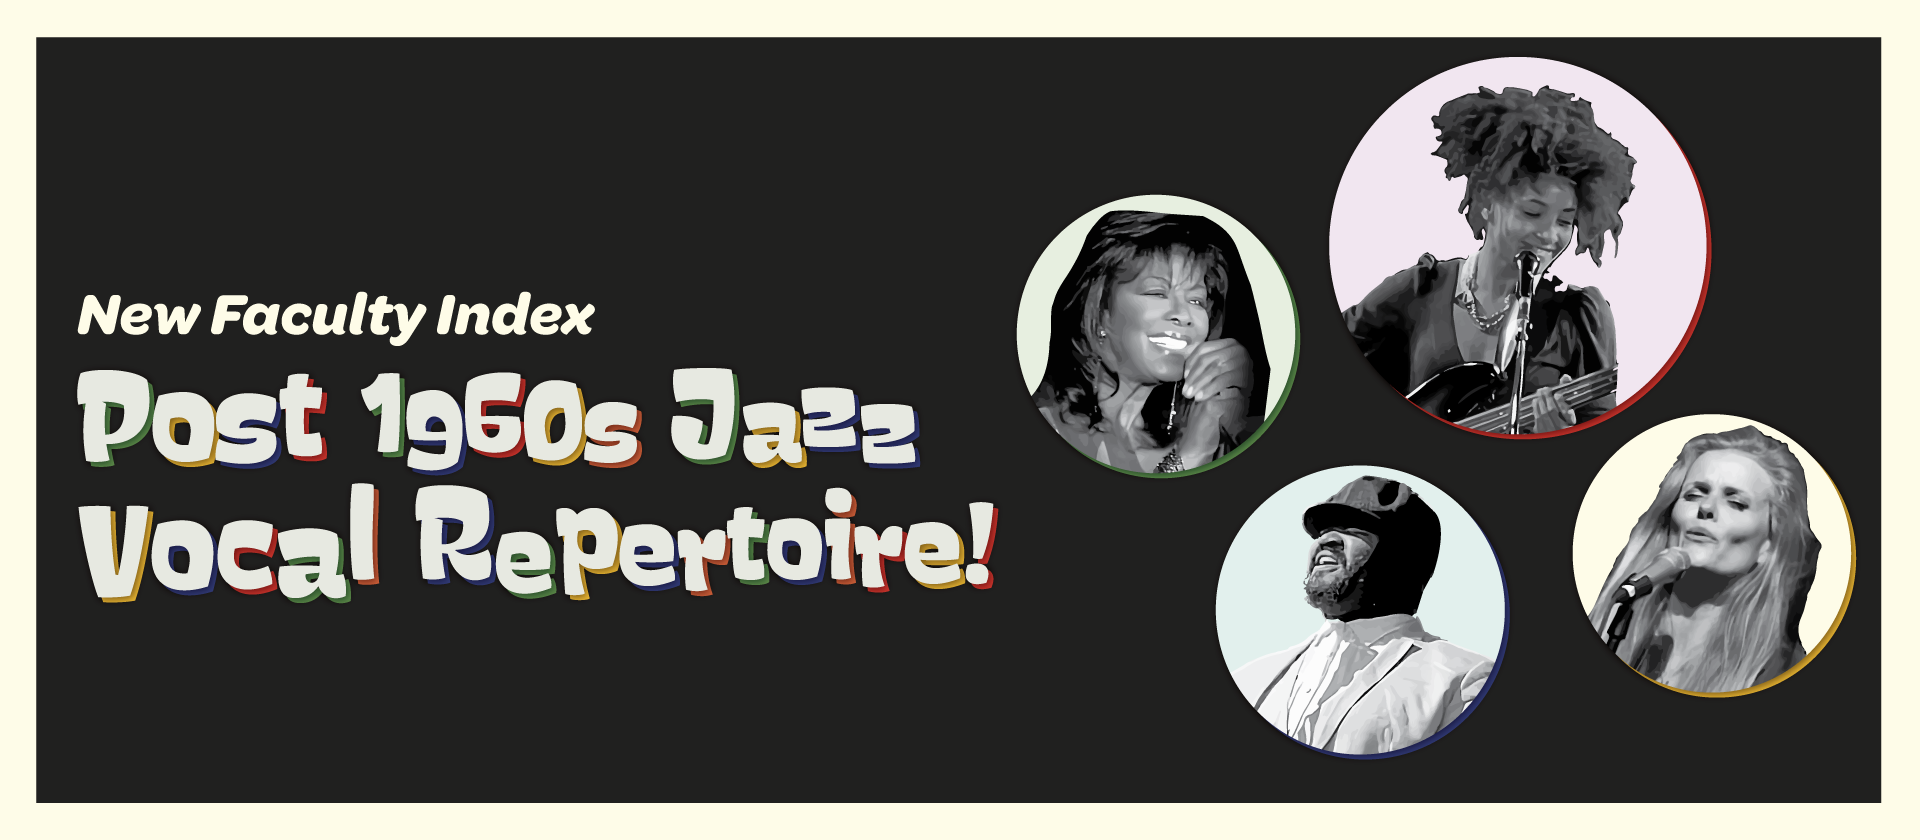 Post 1960s Jazz Vocal Repertoire! Click here to see the collection.